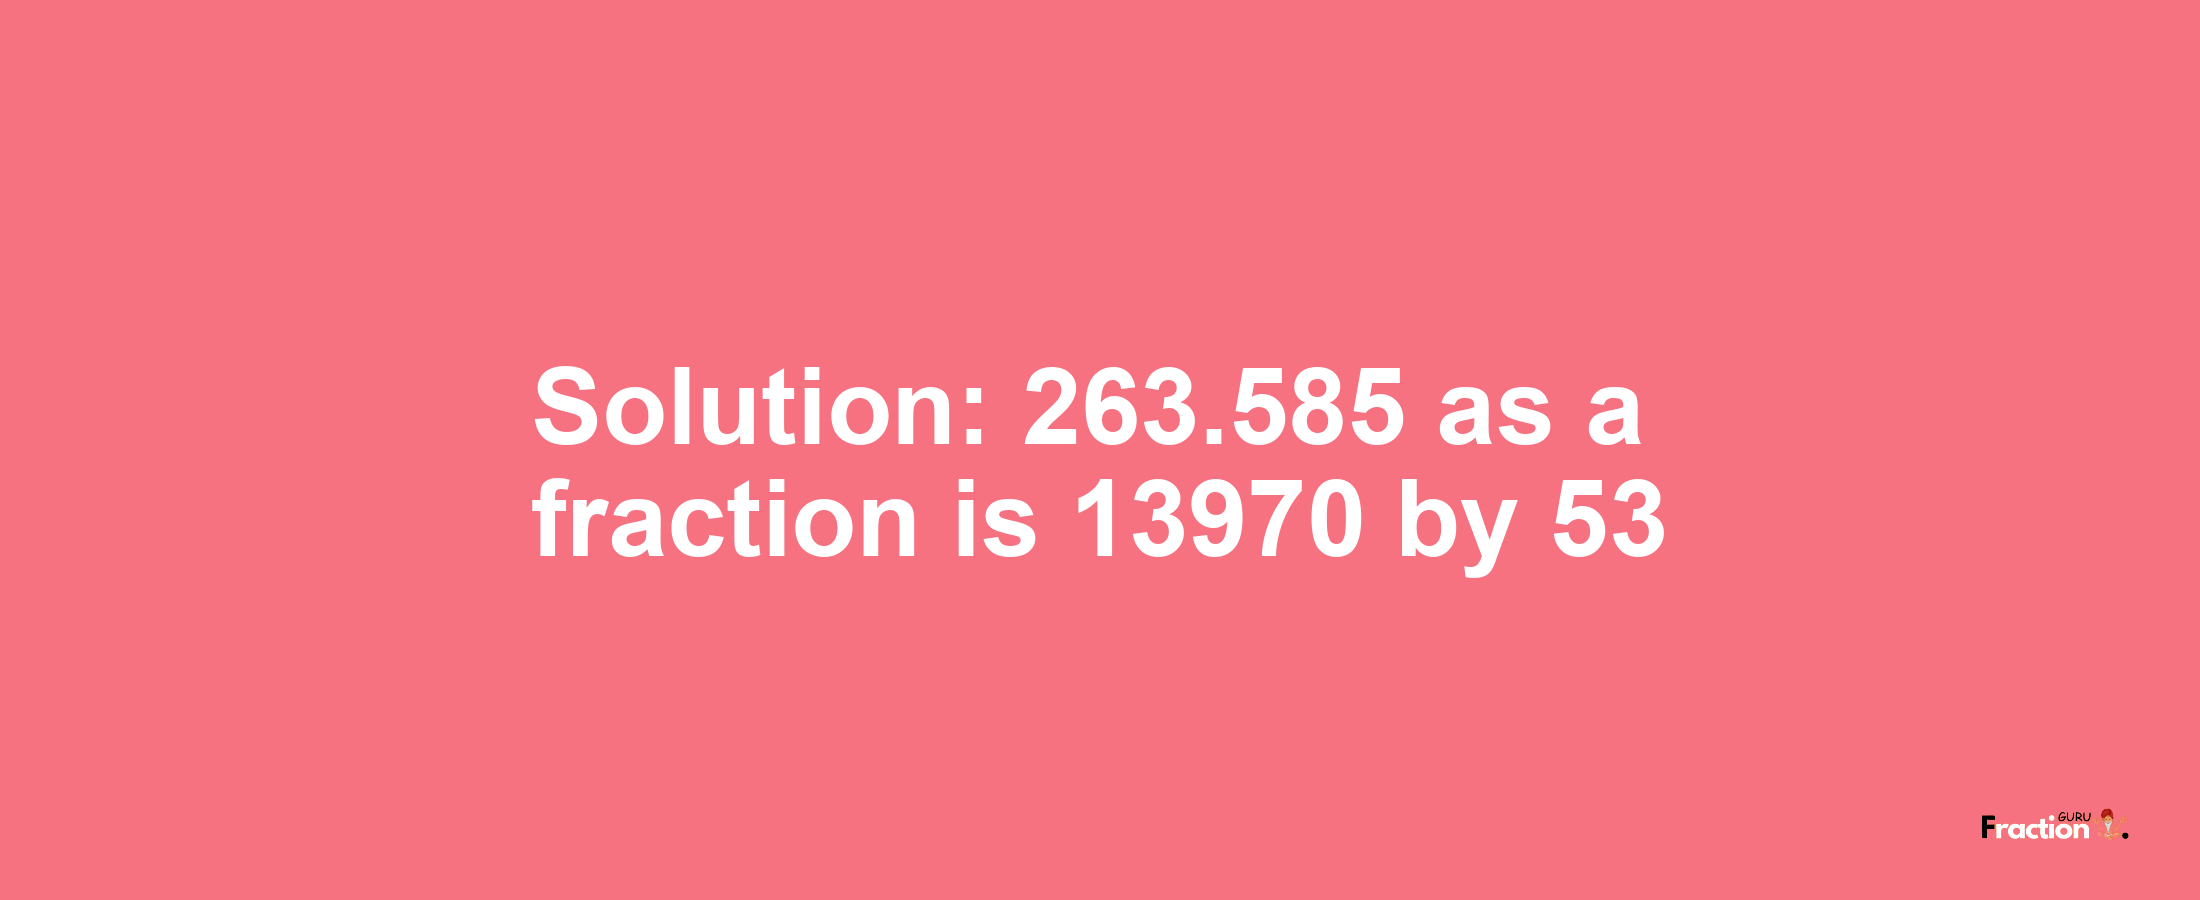 Solution:263.585 as a fraction is 13970/53